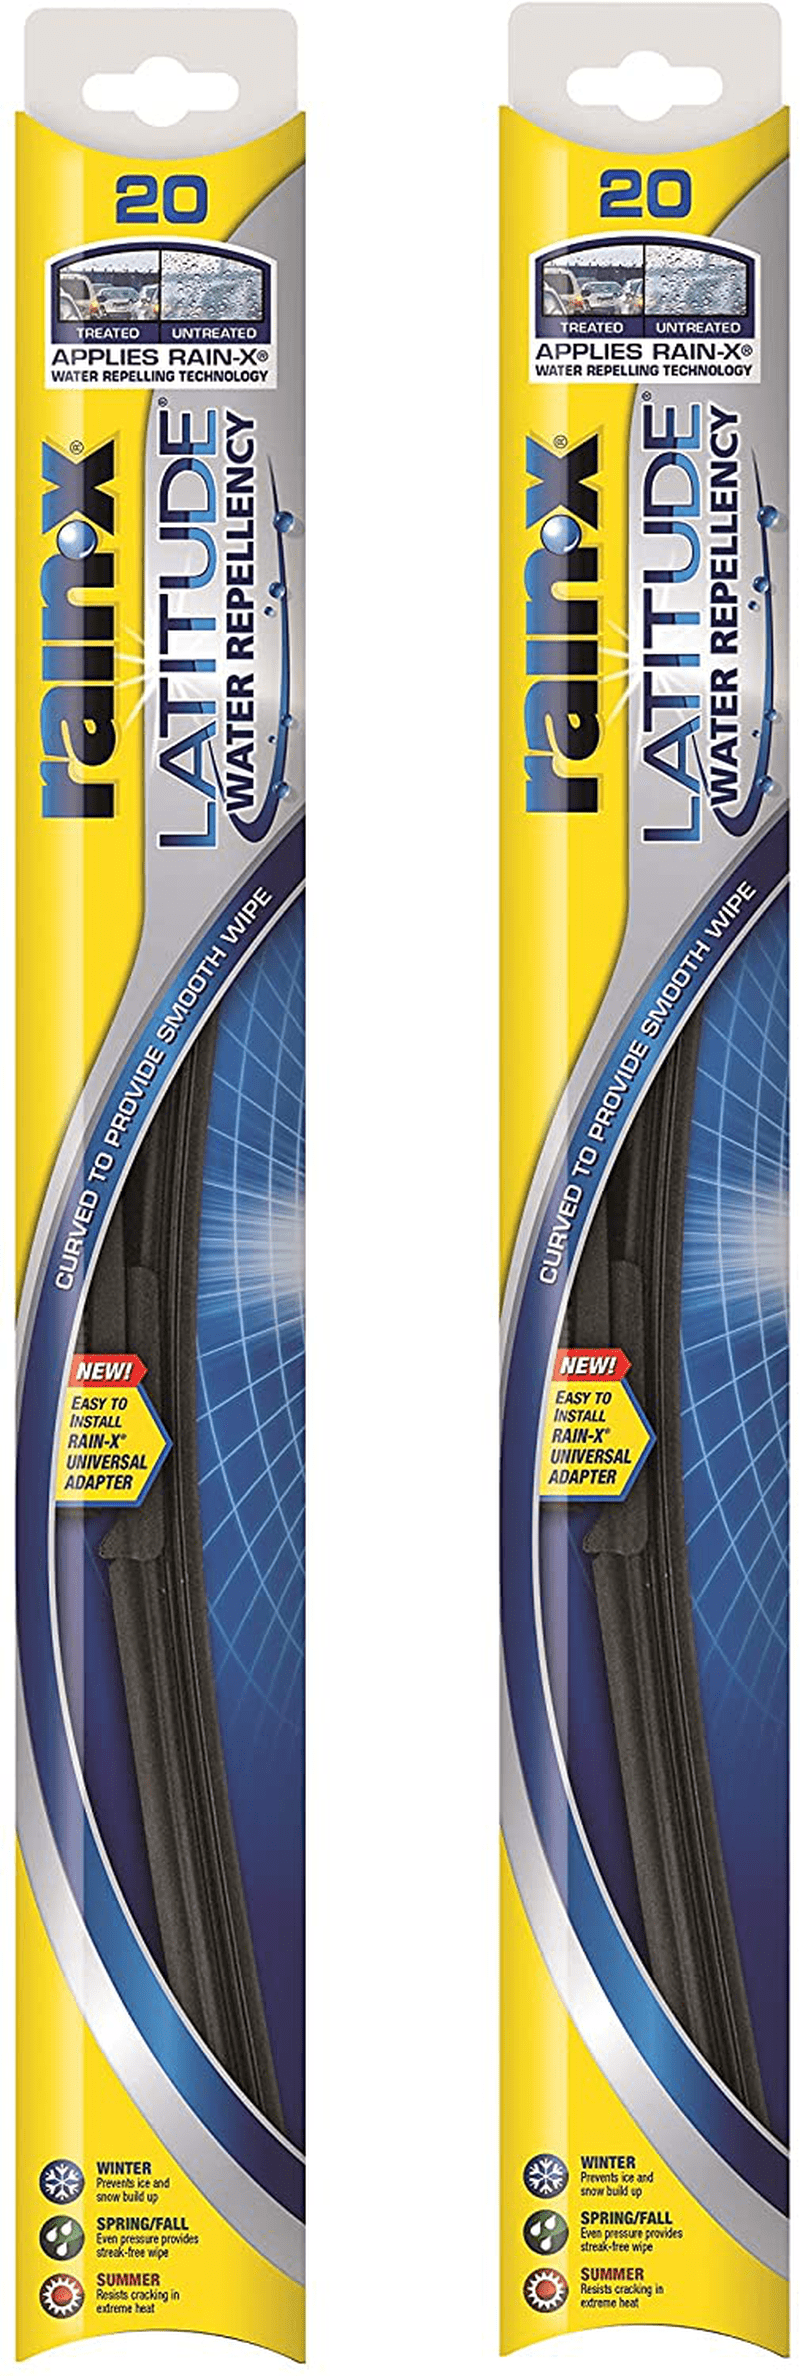 Rain-X - 810163 Latitude Water Repellency Wiper Blade Combo Pack 26" and 16"